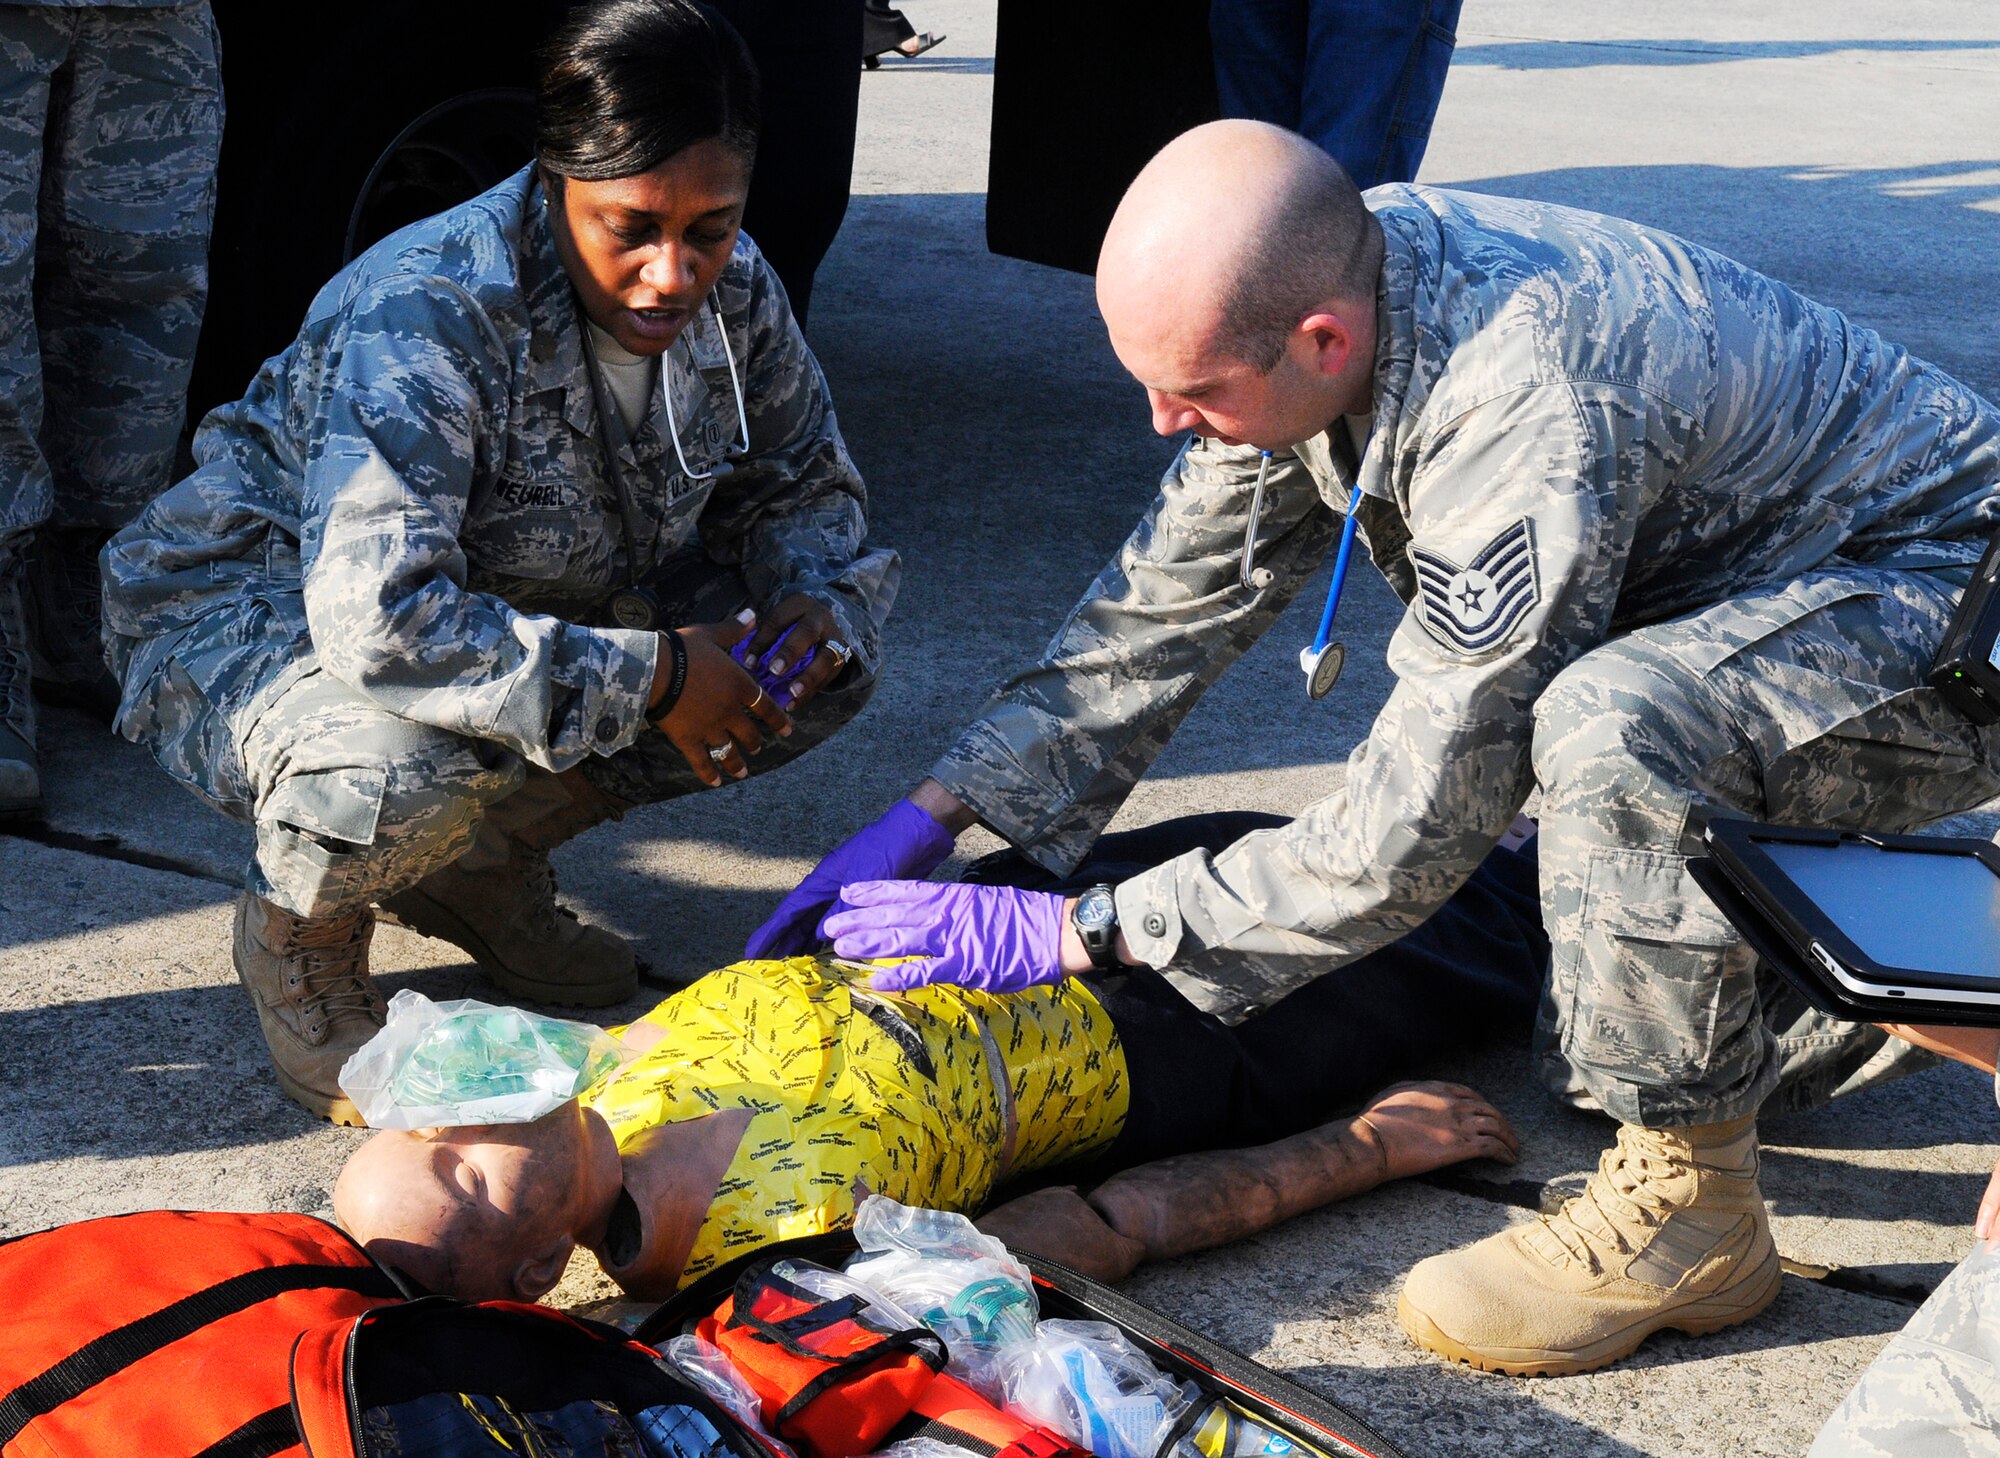 Major Mia Neurell and Tech. Sgt. Allan Pickren attend to a victim during the simulated C-130 egress exercise. U. S. Air Force photo by Sue Sapp